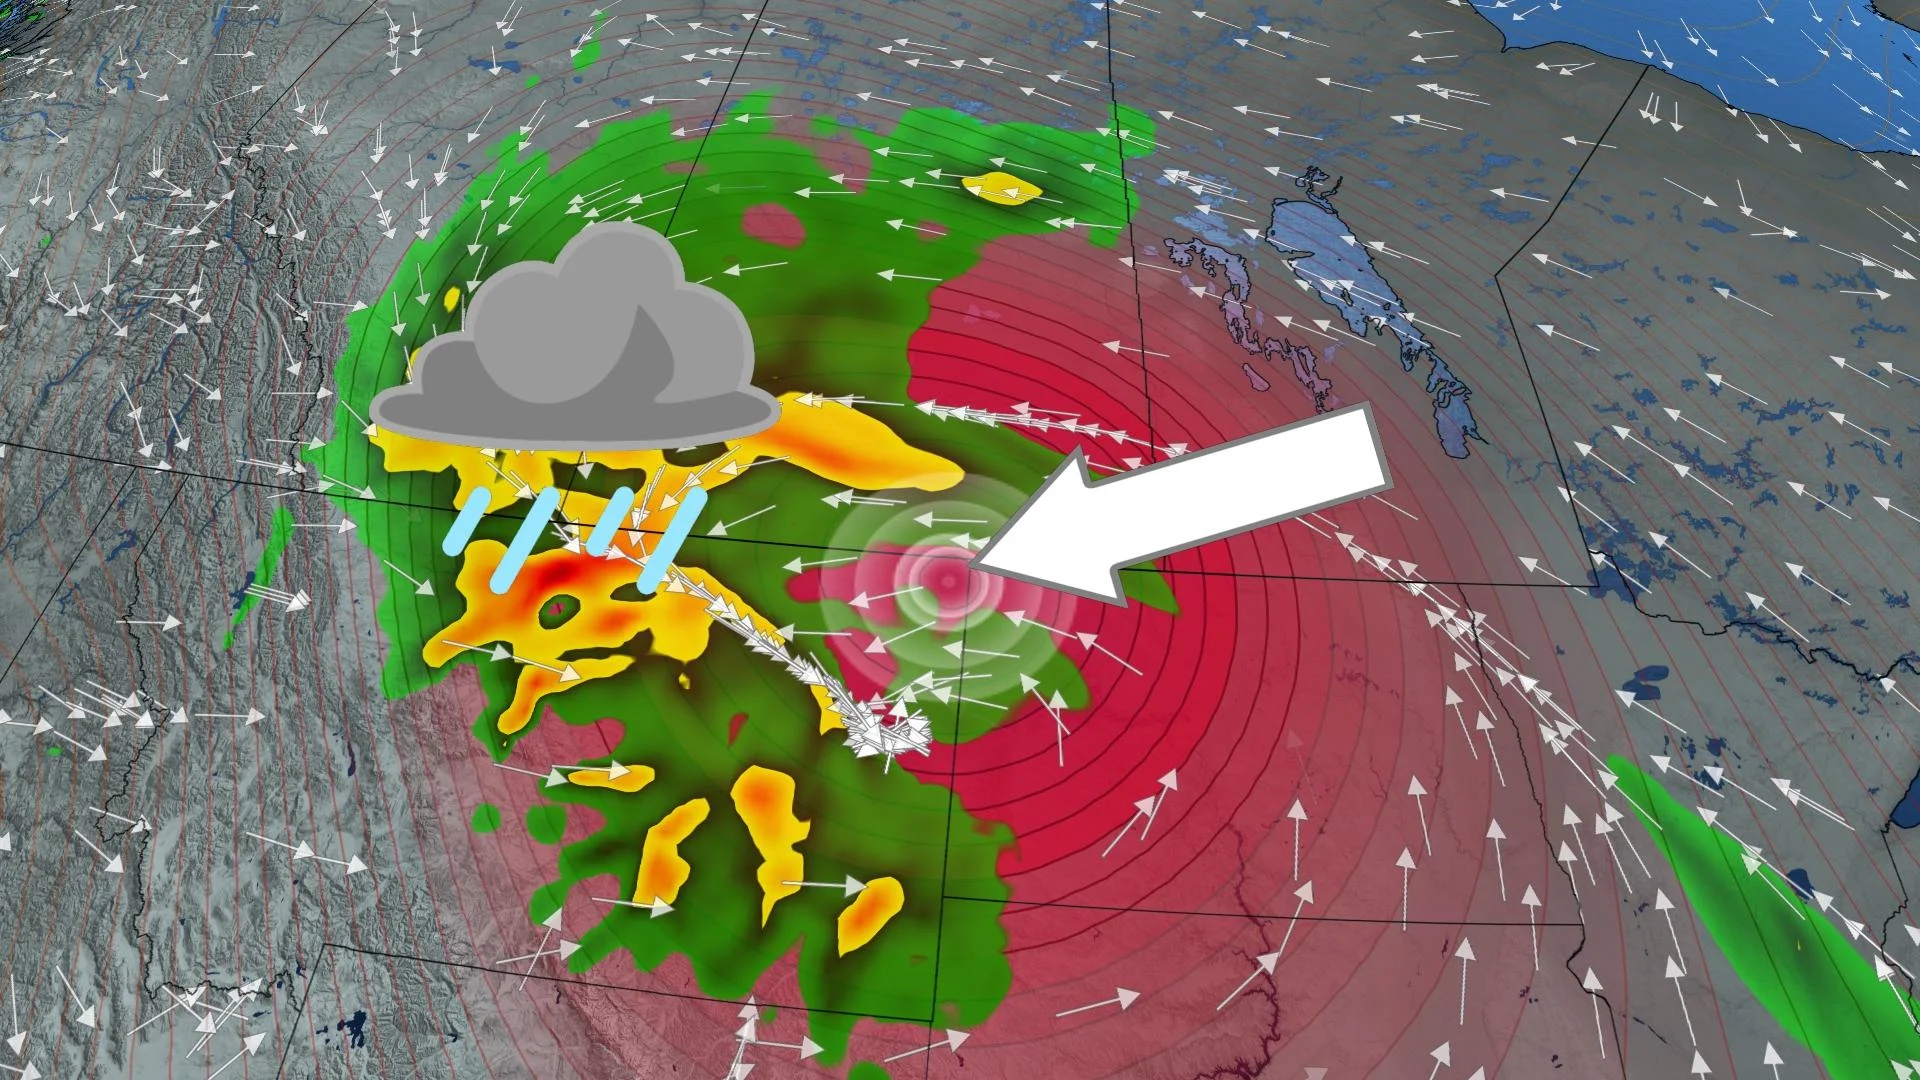 The Prairies will be in the path of a potent storm next week, potentially the strongest May storm for that part of North America. Details, here